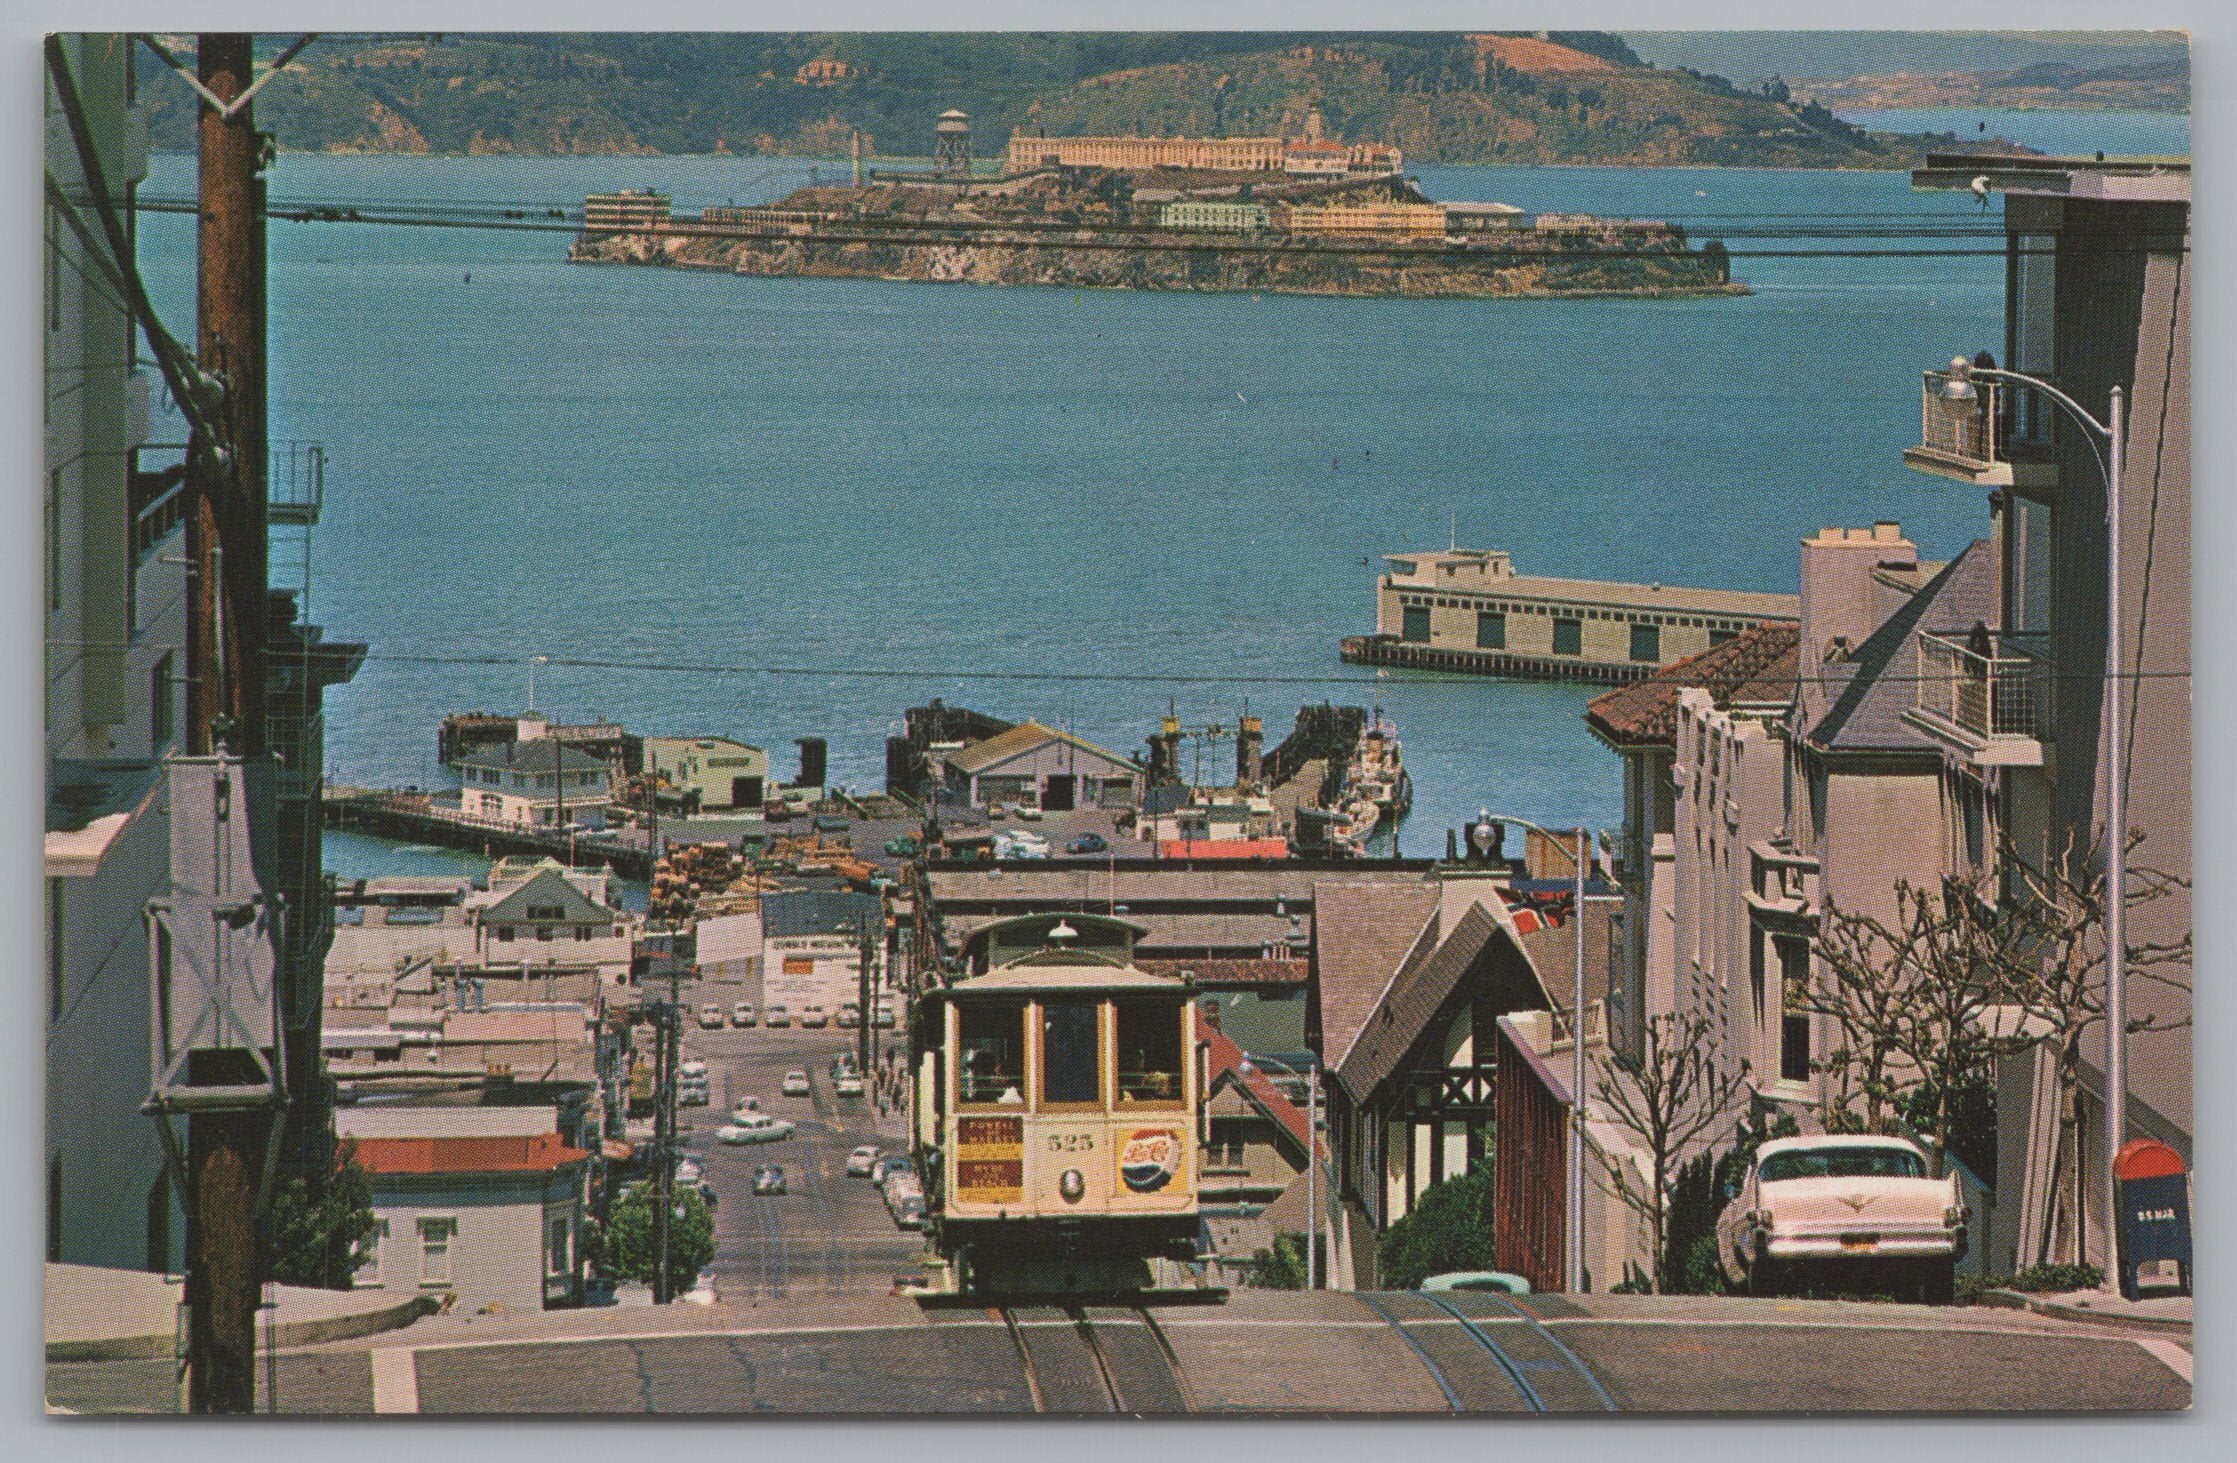 Cable Car On The San Francisco Hill, California, USA, Vintage Post Card.